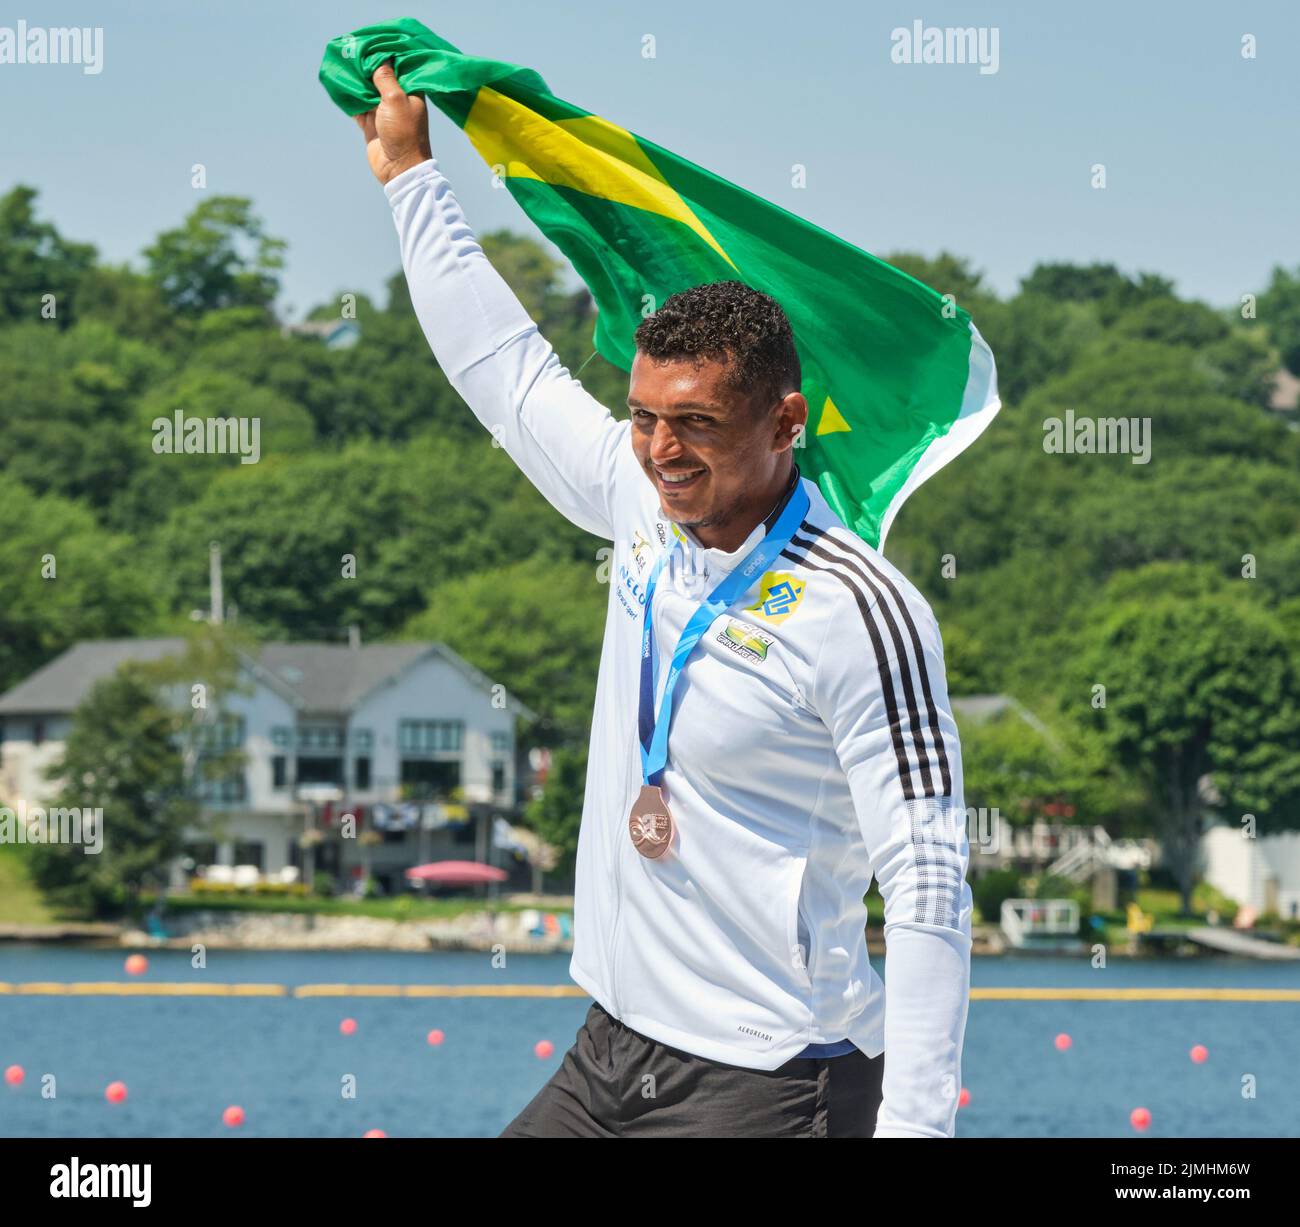 Dartmouth, Canada. August 6th, 2022. Gold Medalists and World Champion Isaquias dos Santos from Brazil celebrating during at his medal ceremony in the C1 Men 500m event. Santos had a dominating race finishing over 2 sconds ahead of the field The 2022 ICF Canoe Sprint and Paracanoe World Championships takes place on Lake Banook in Dartmouth (Halifax). Credit: meanderingemu/Alamy Live News Stock Photo